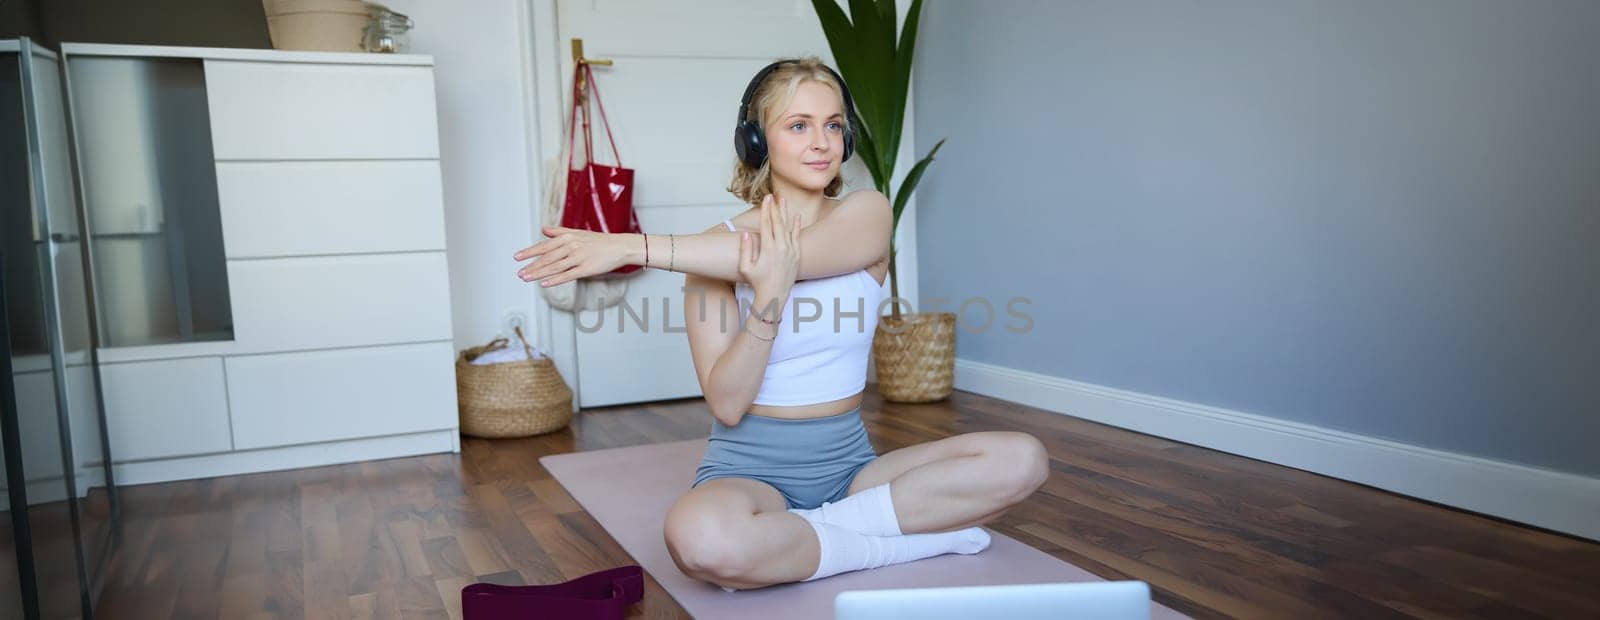 Portrait of beautiful, athletic woman at home, doing workout, watching fitness instructor video on laptop, wearing headphones, stretching her arms.